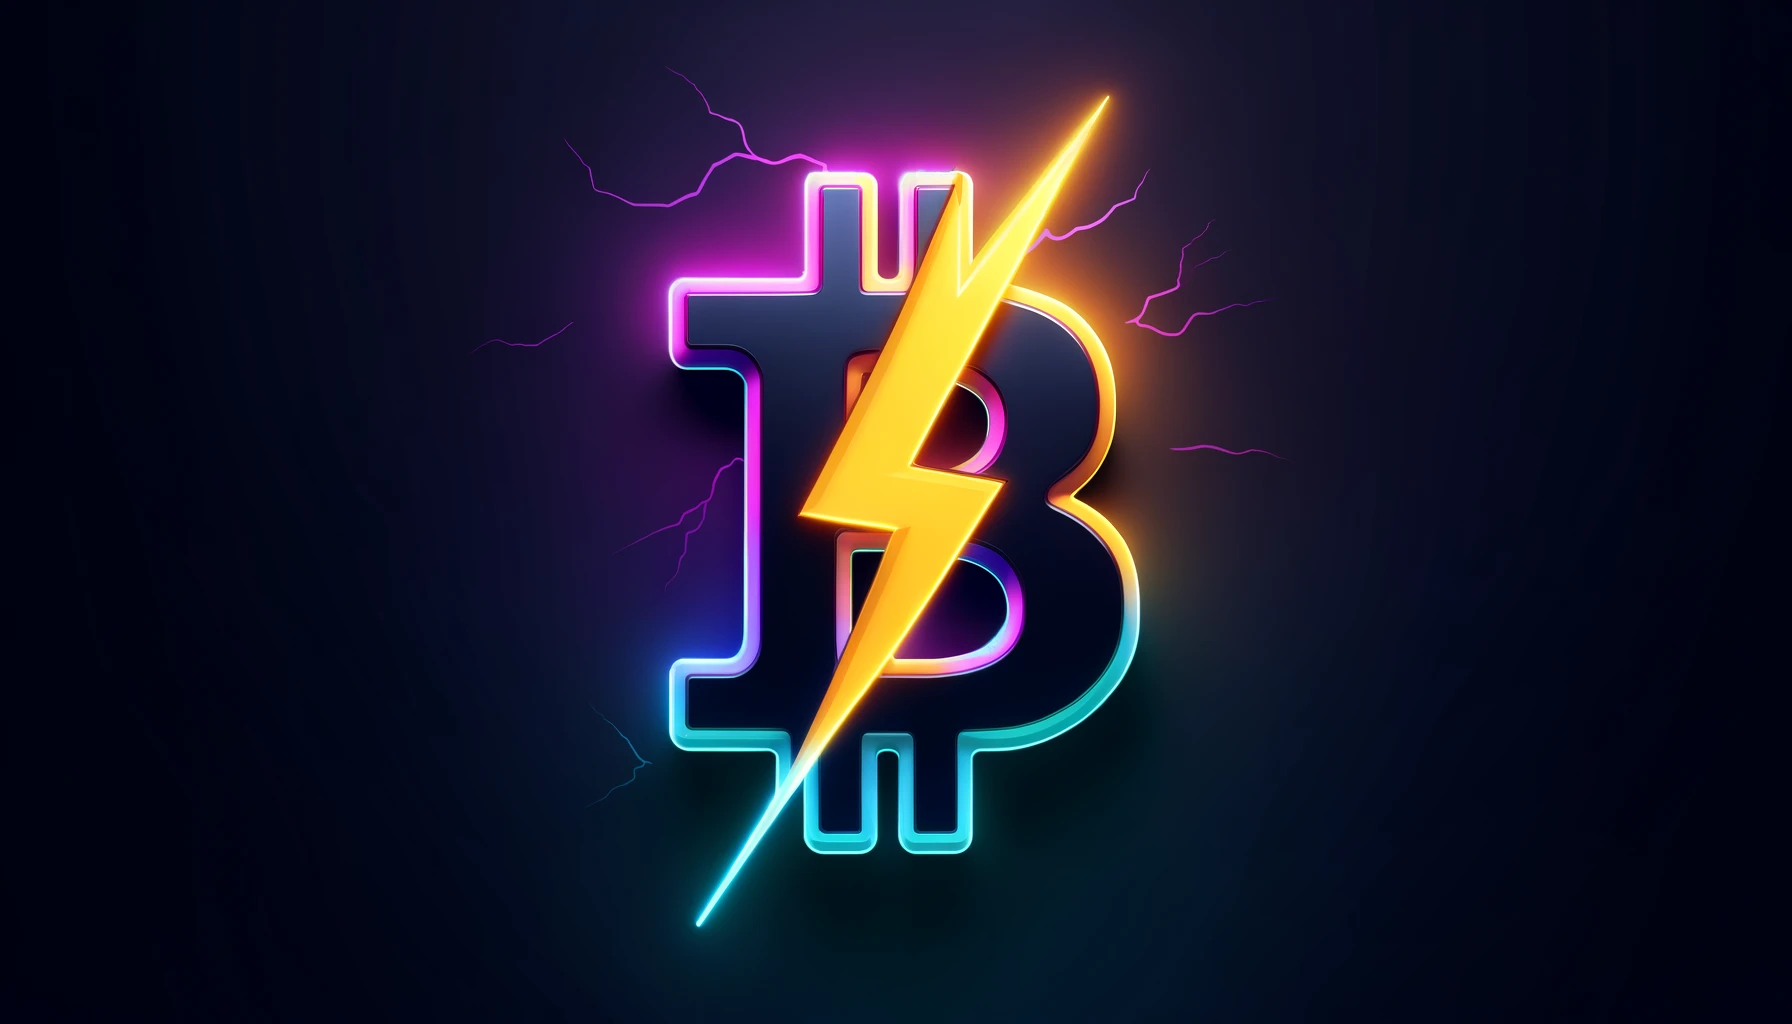 Coinbase Rolls Out Bitcoin’s Lightning Network - The Defiant